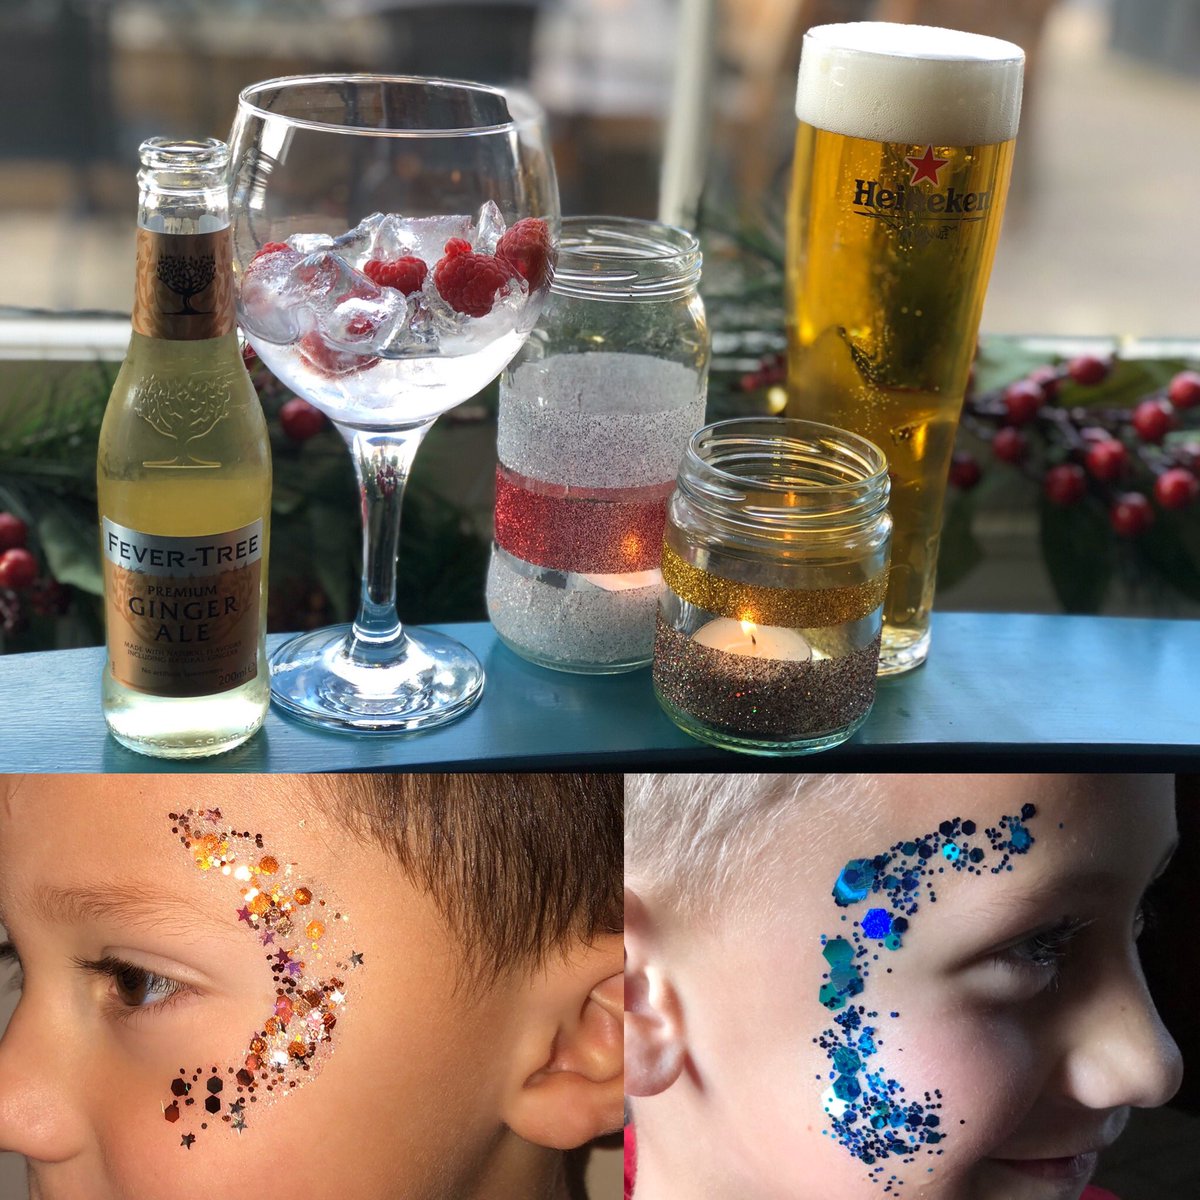 C H R I S T M A S   M A R K E T
Let your children make a glittery candle holder, pick from our lucky dip sack or have their faces sparkled ✨ while you enjoy one of your favourite drinks 🍷 

#faceglitter #glitterface #tenterden #christmasintenterden #christmas #luckydip #raffle